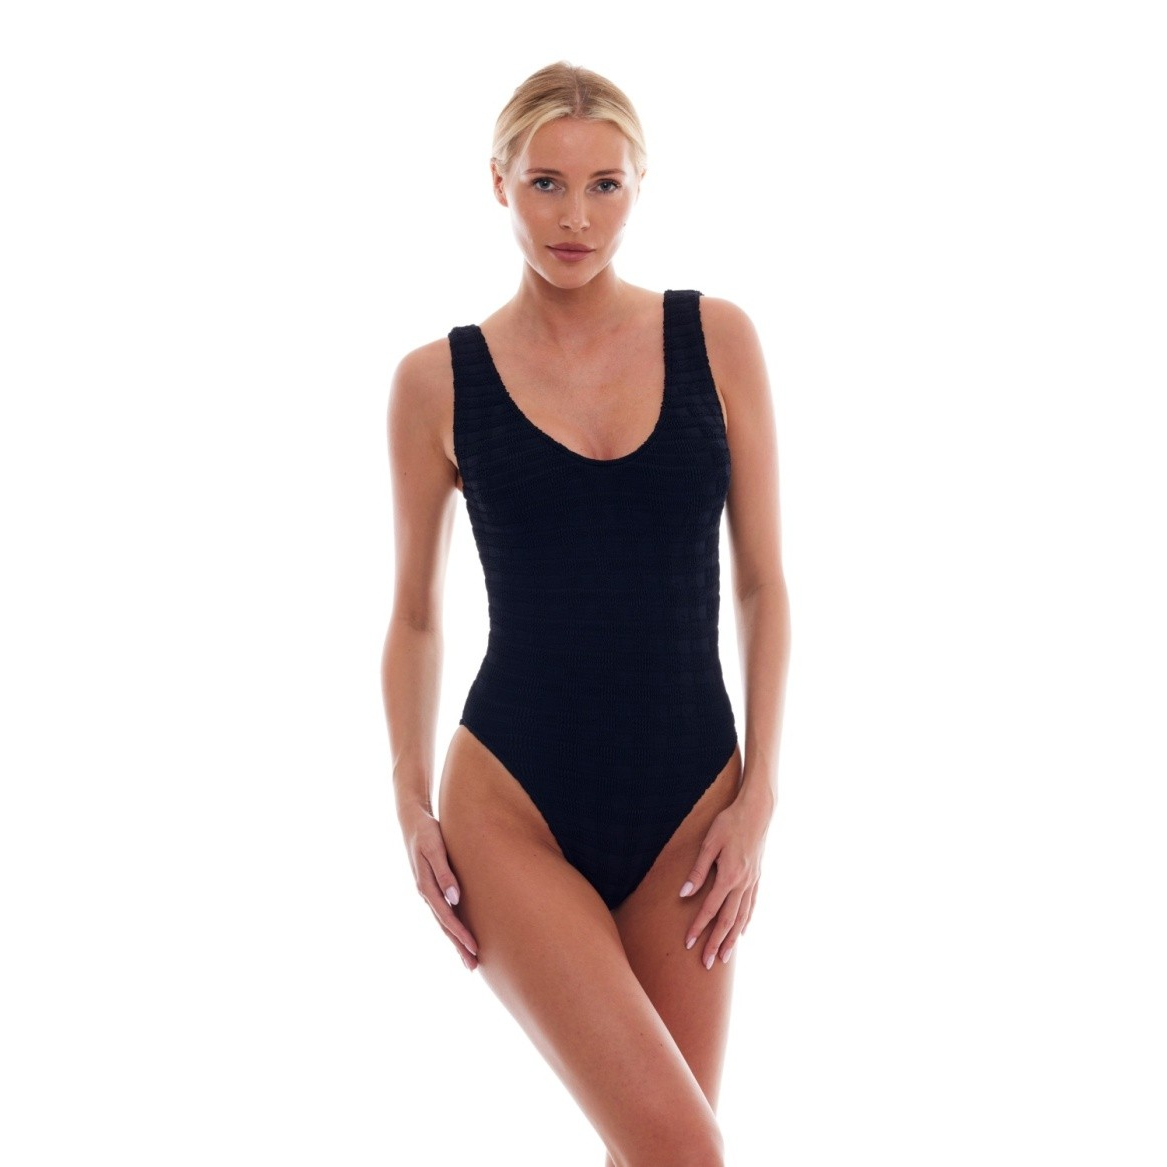 Marbella Classic Low Back One Piece